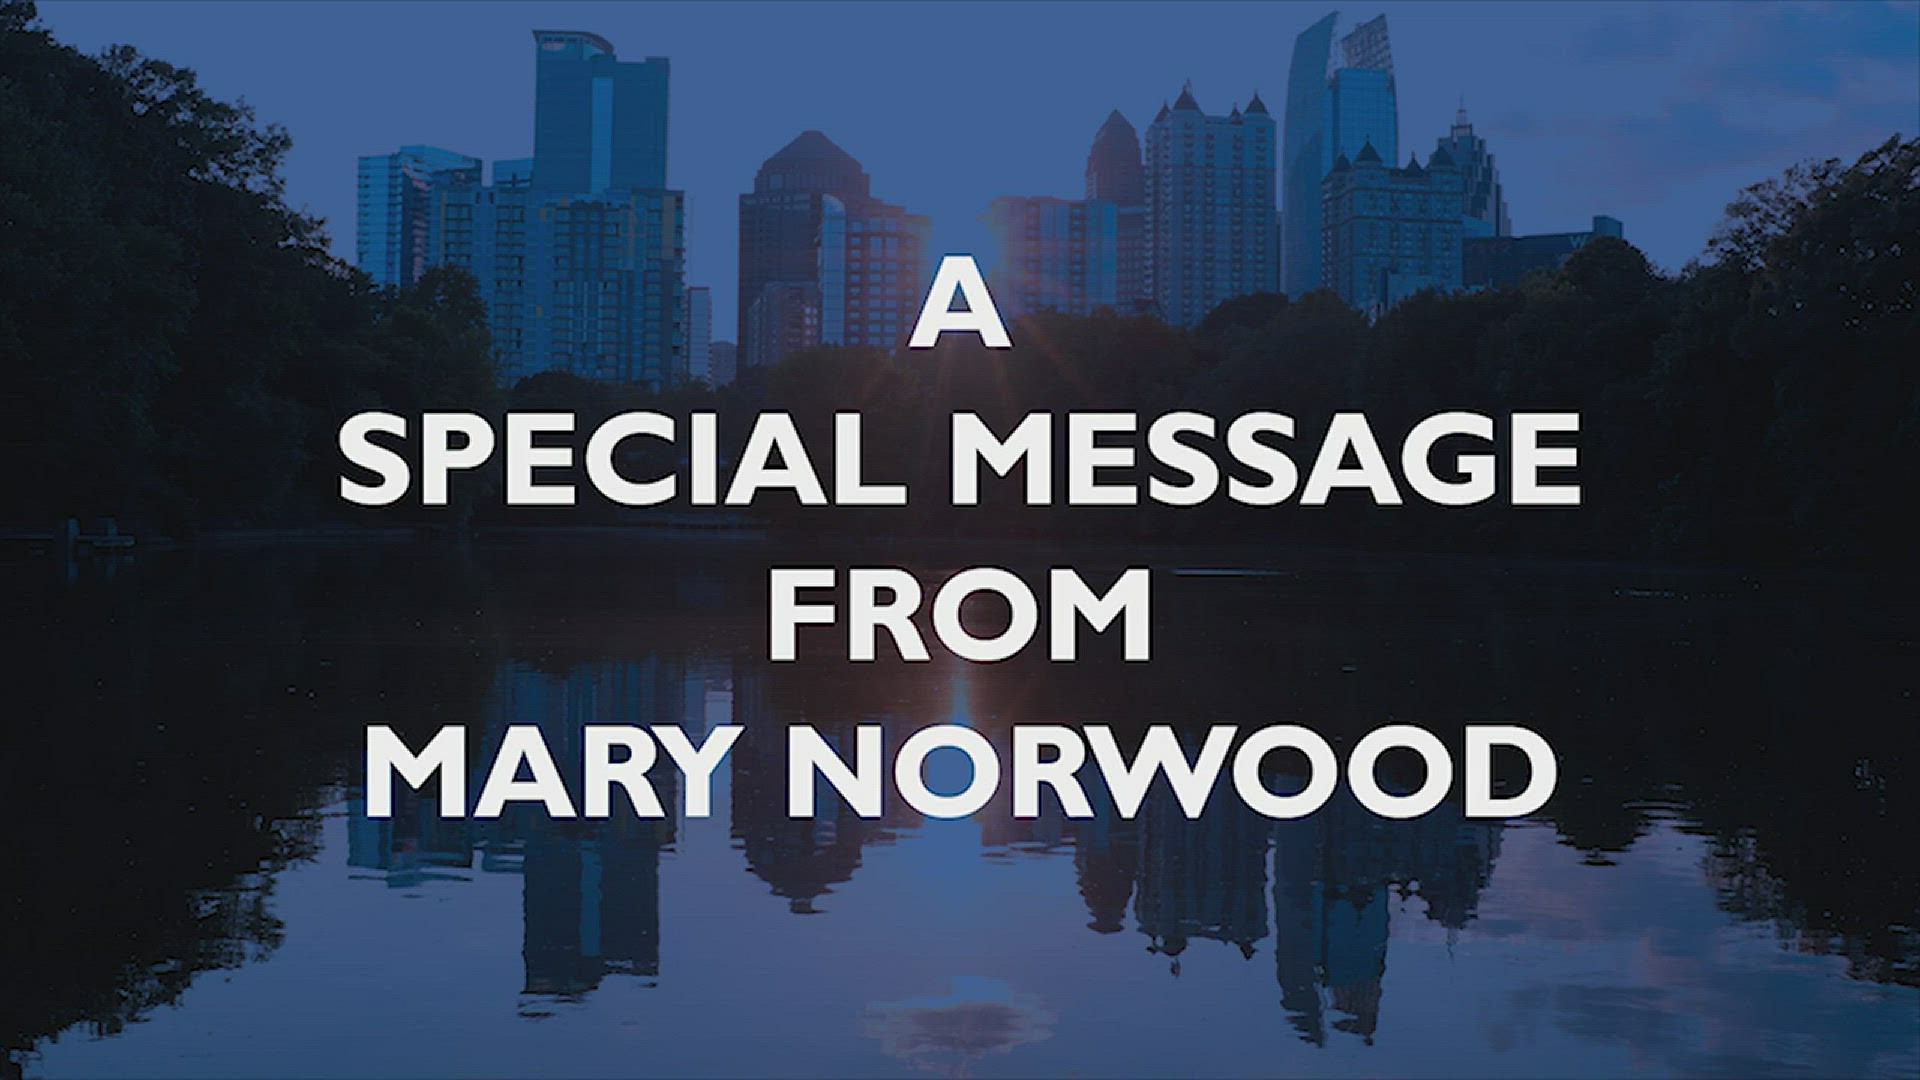 Just two weeks after being narrowly defeated in the Atlanta mayoral runoff, Mary Norwood has officially conceded the race.